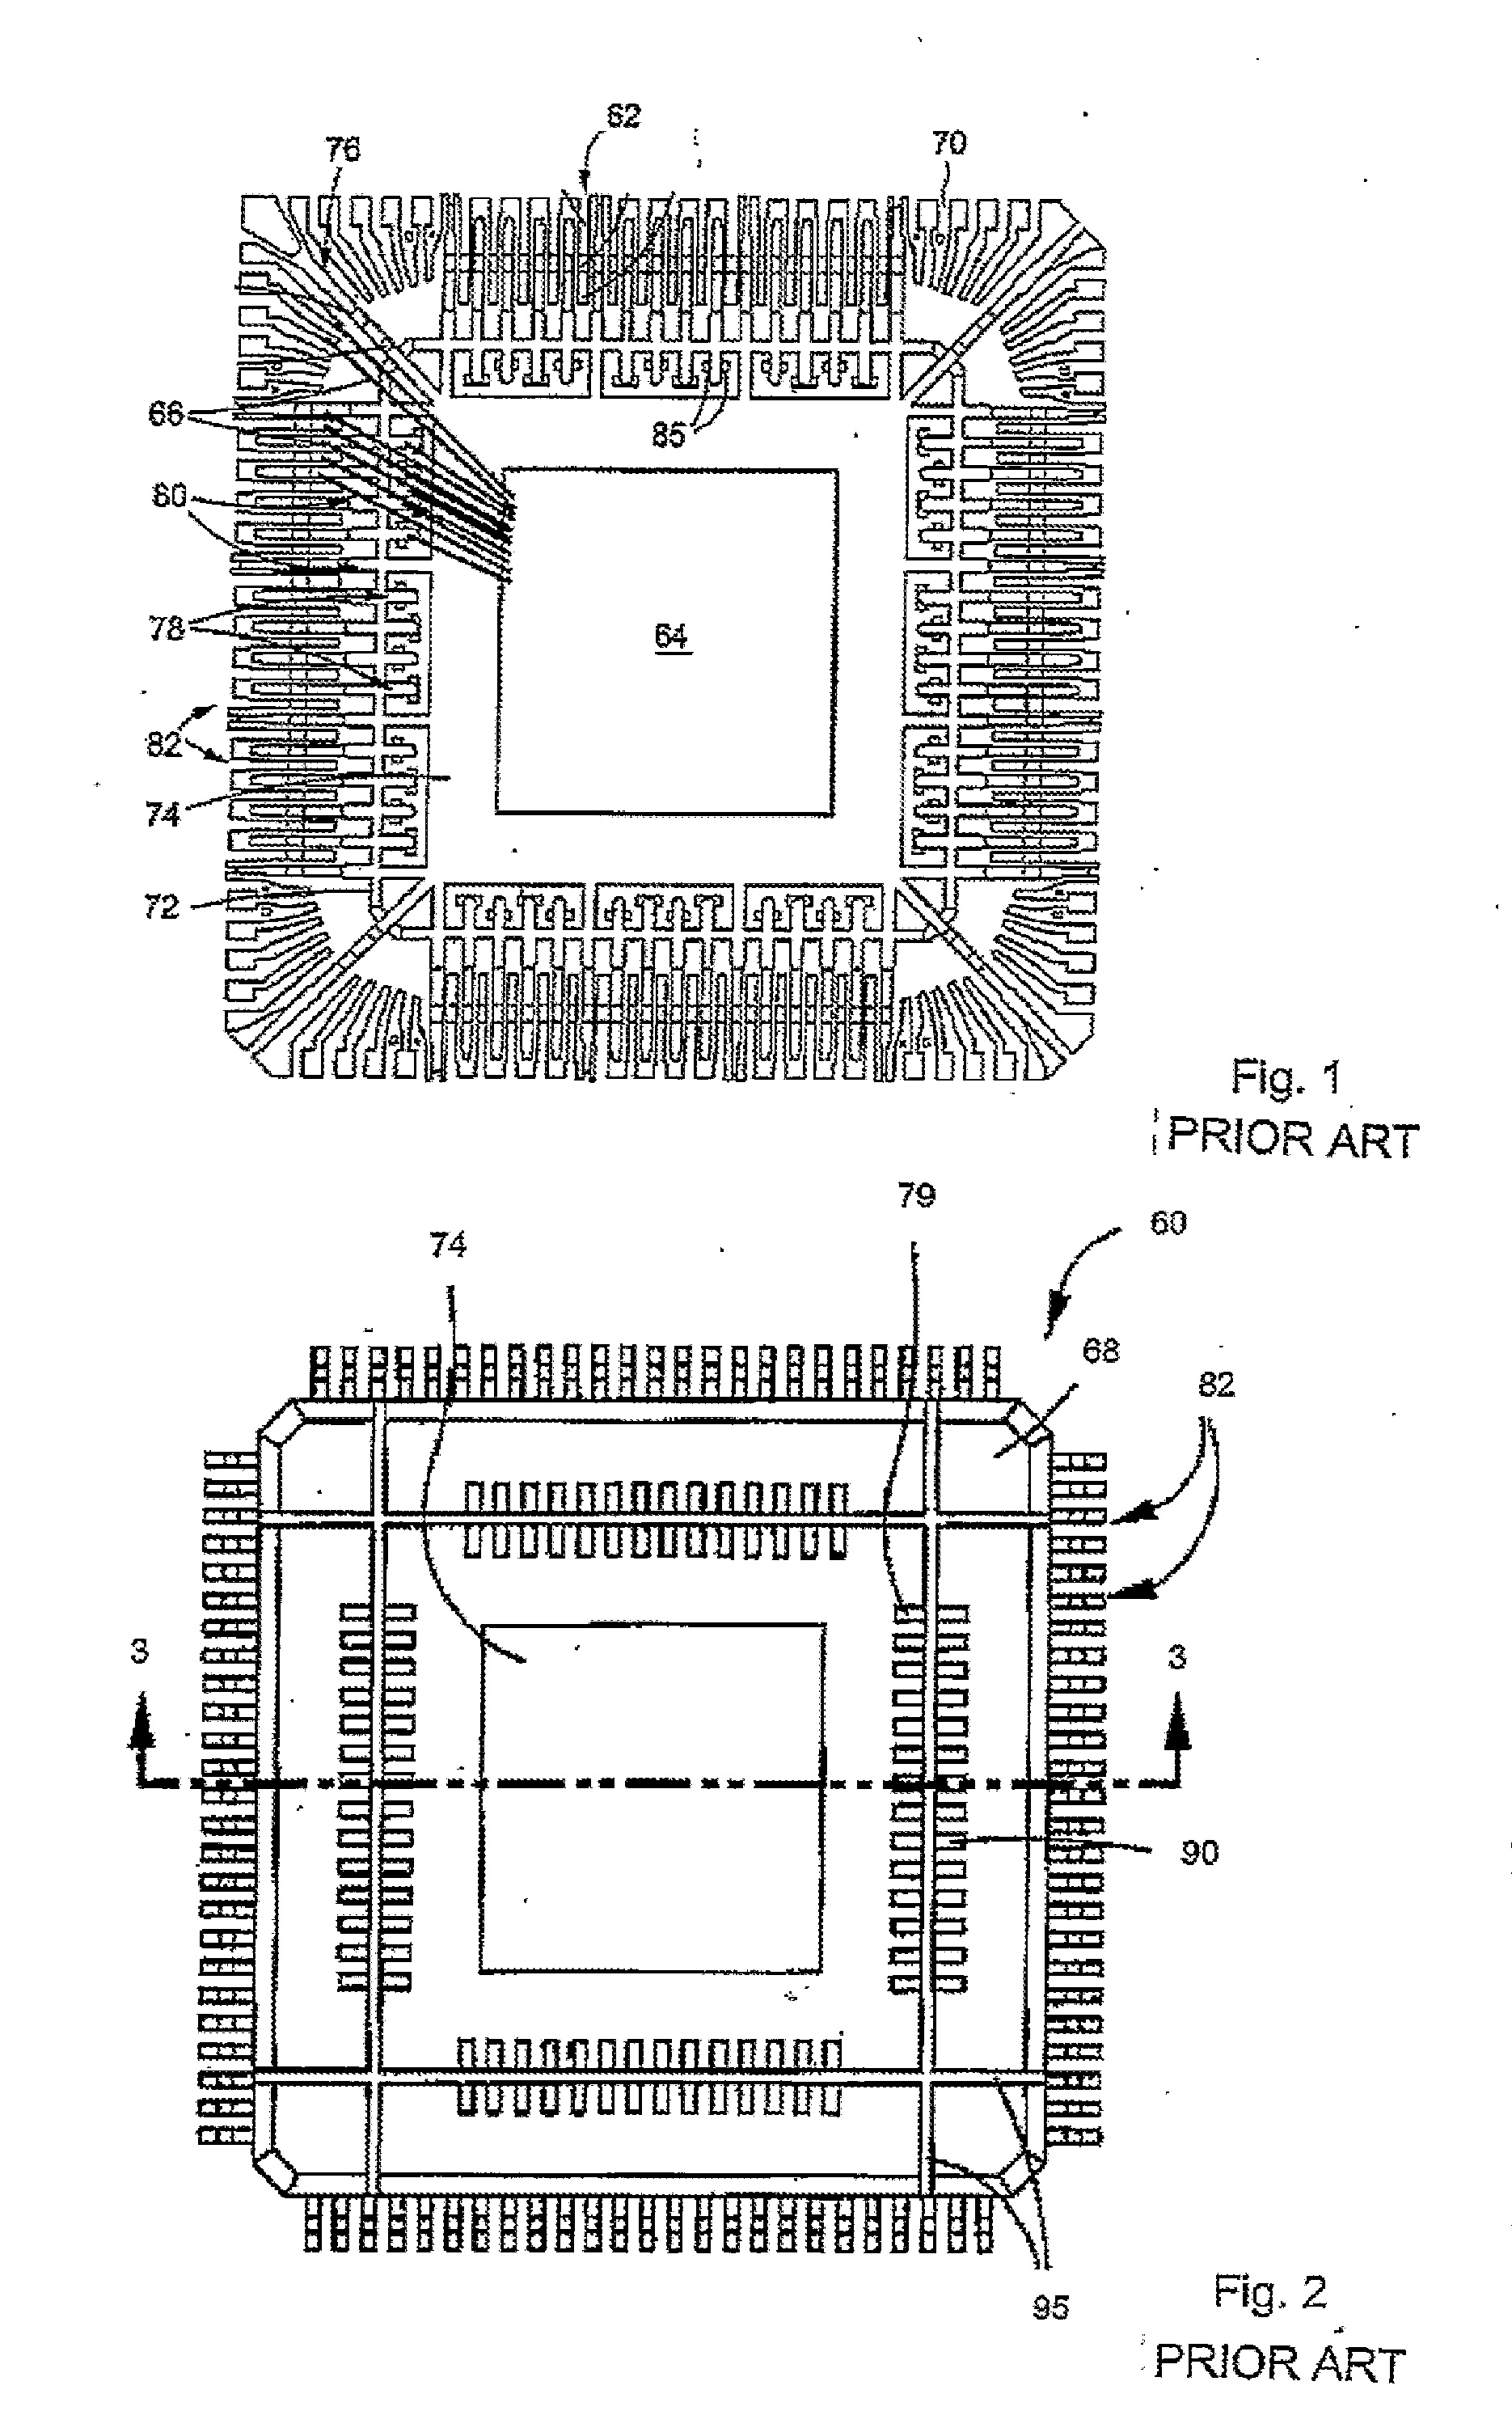 Quad flat semiconductor device with additional contacts